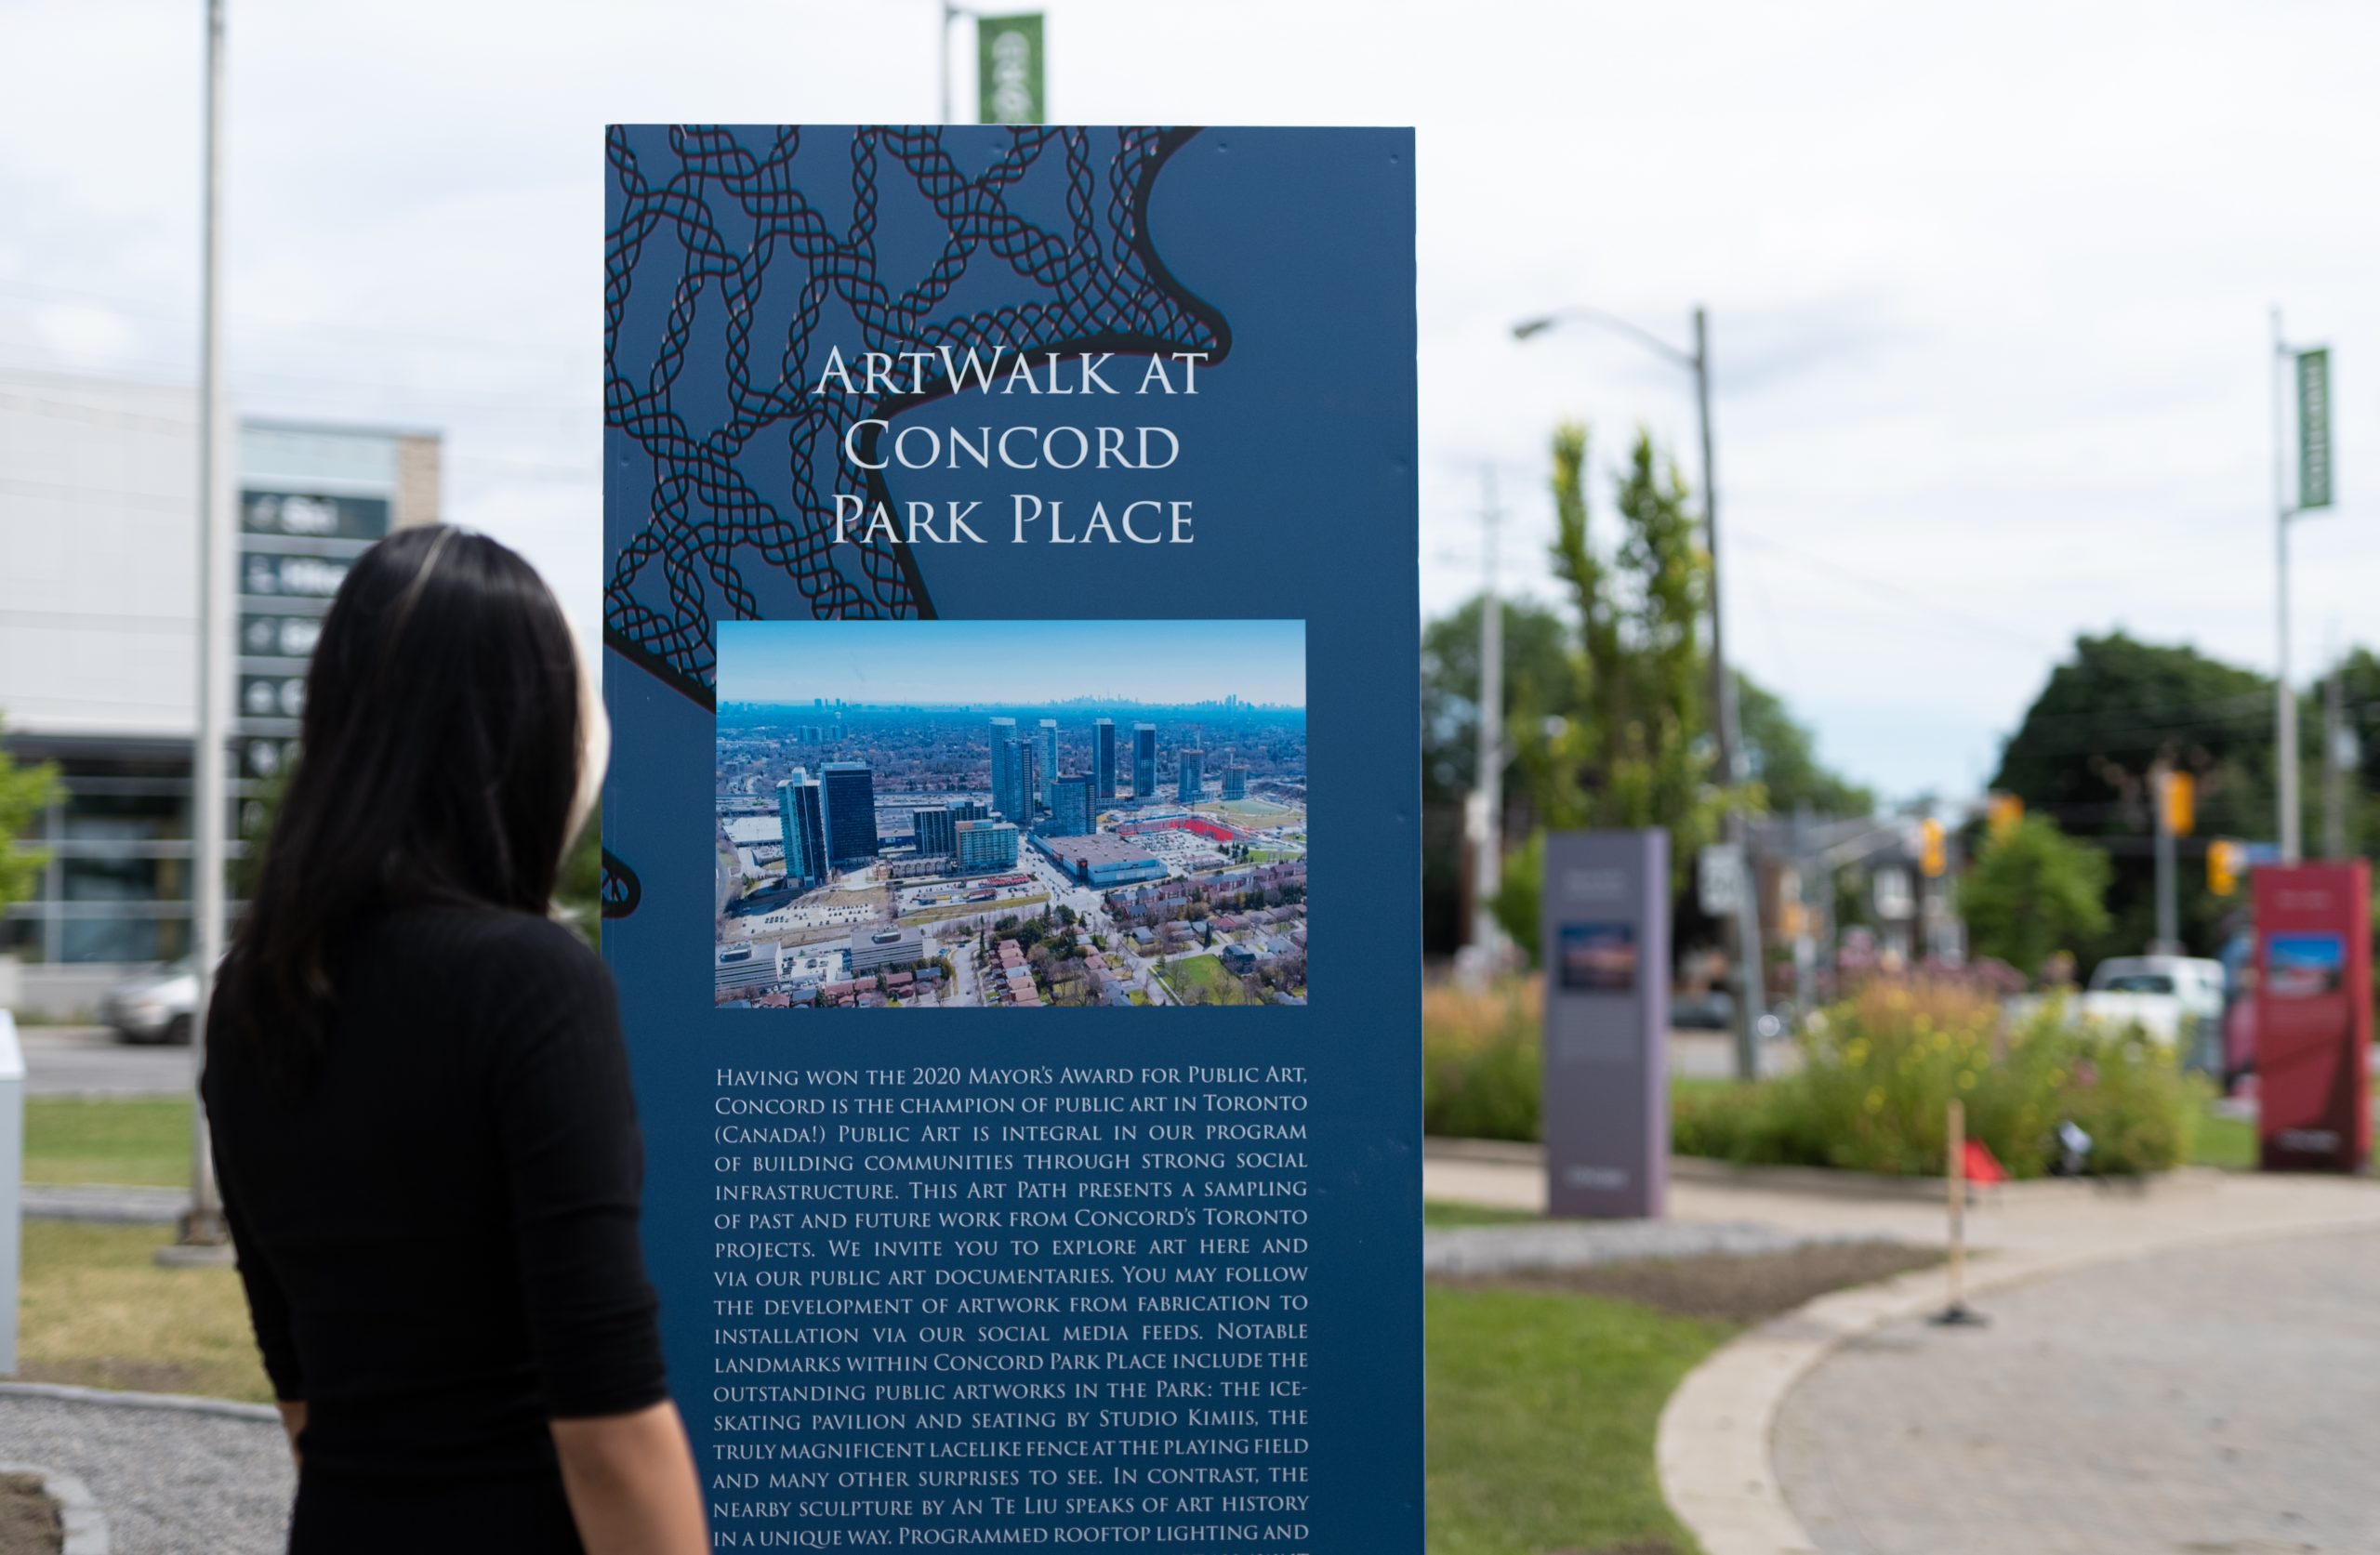 image featuring woman looking at small information board about artwalk at concord park place with event using eventzee scavenger hunt app